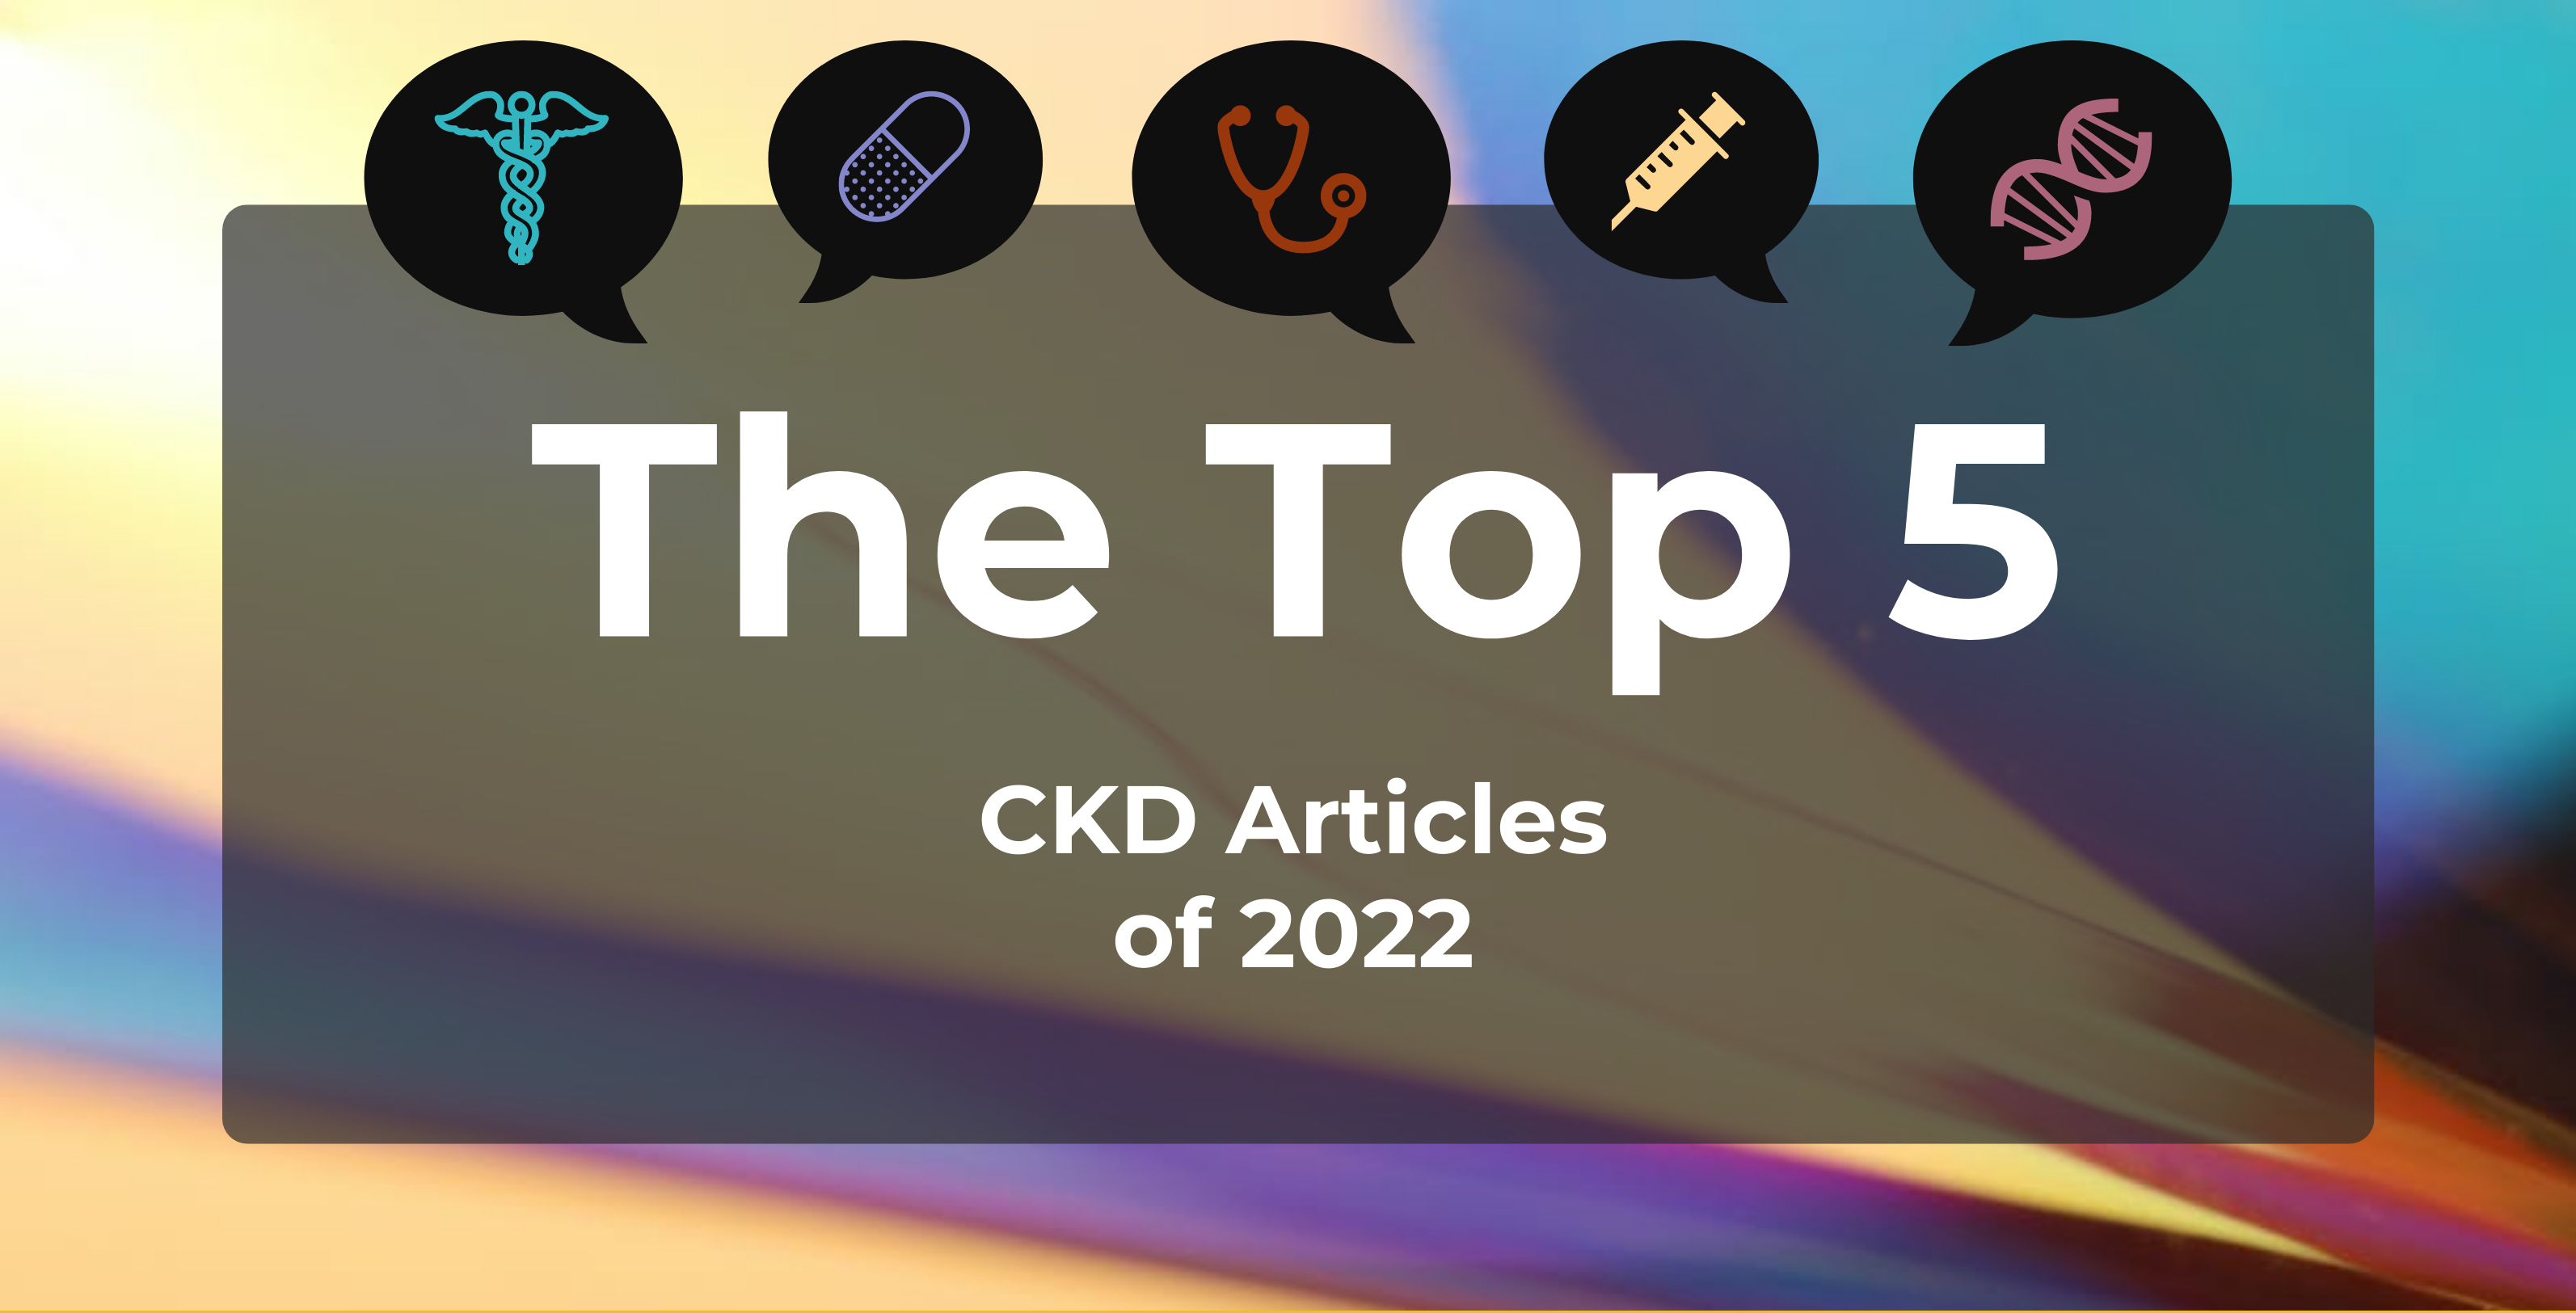 The Top 5 CKD Articles of 2022